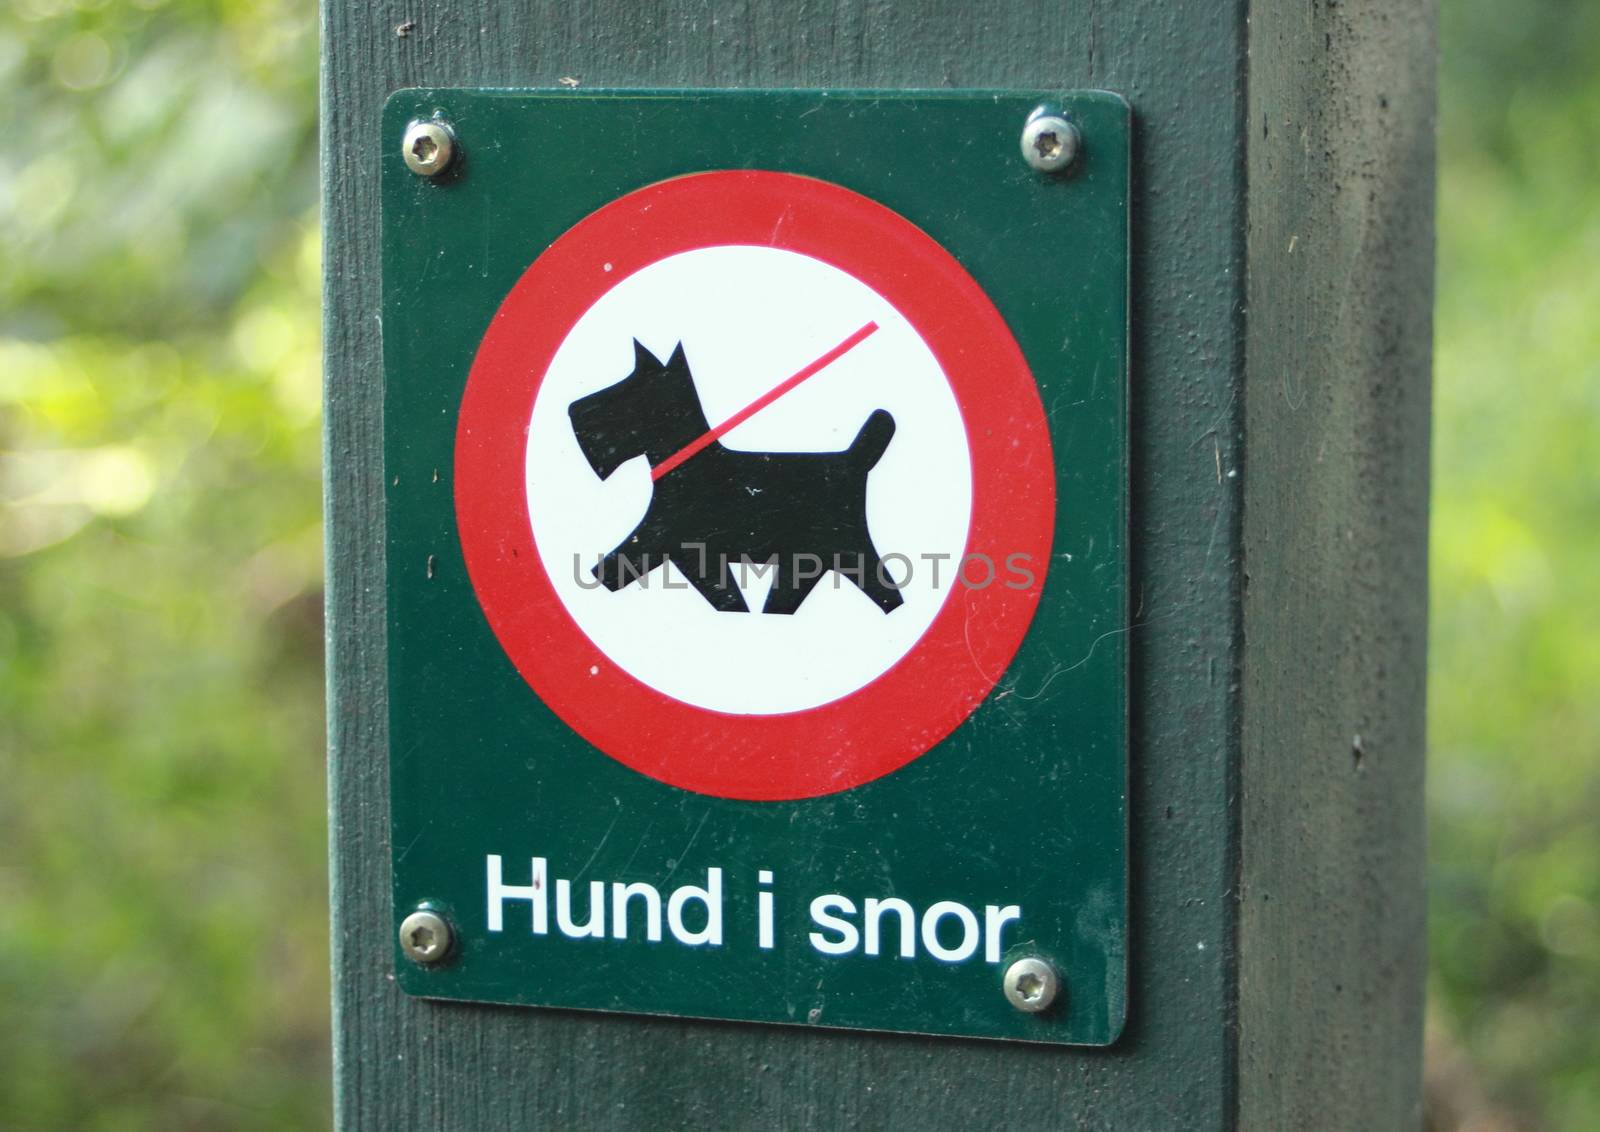 Sign in forest prohibits dogs without leash